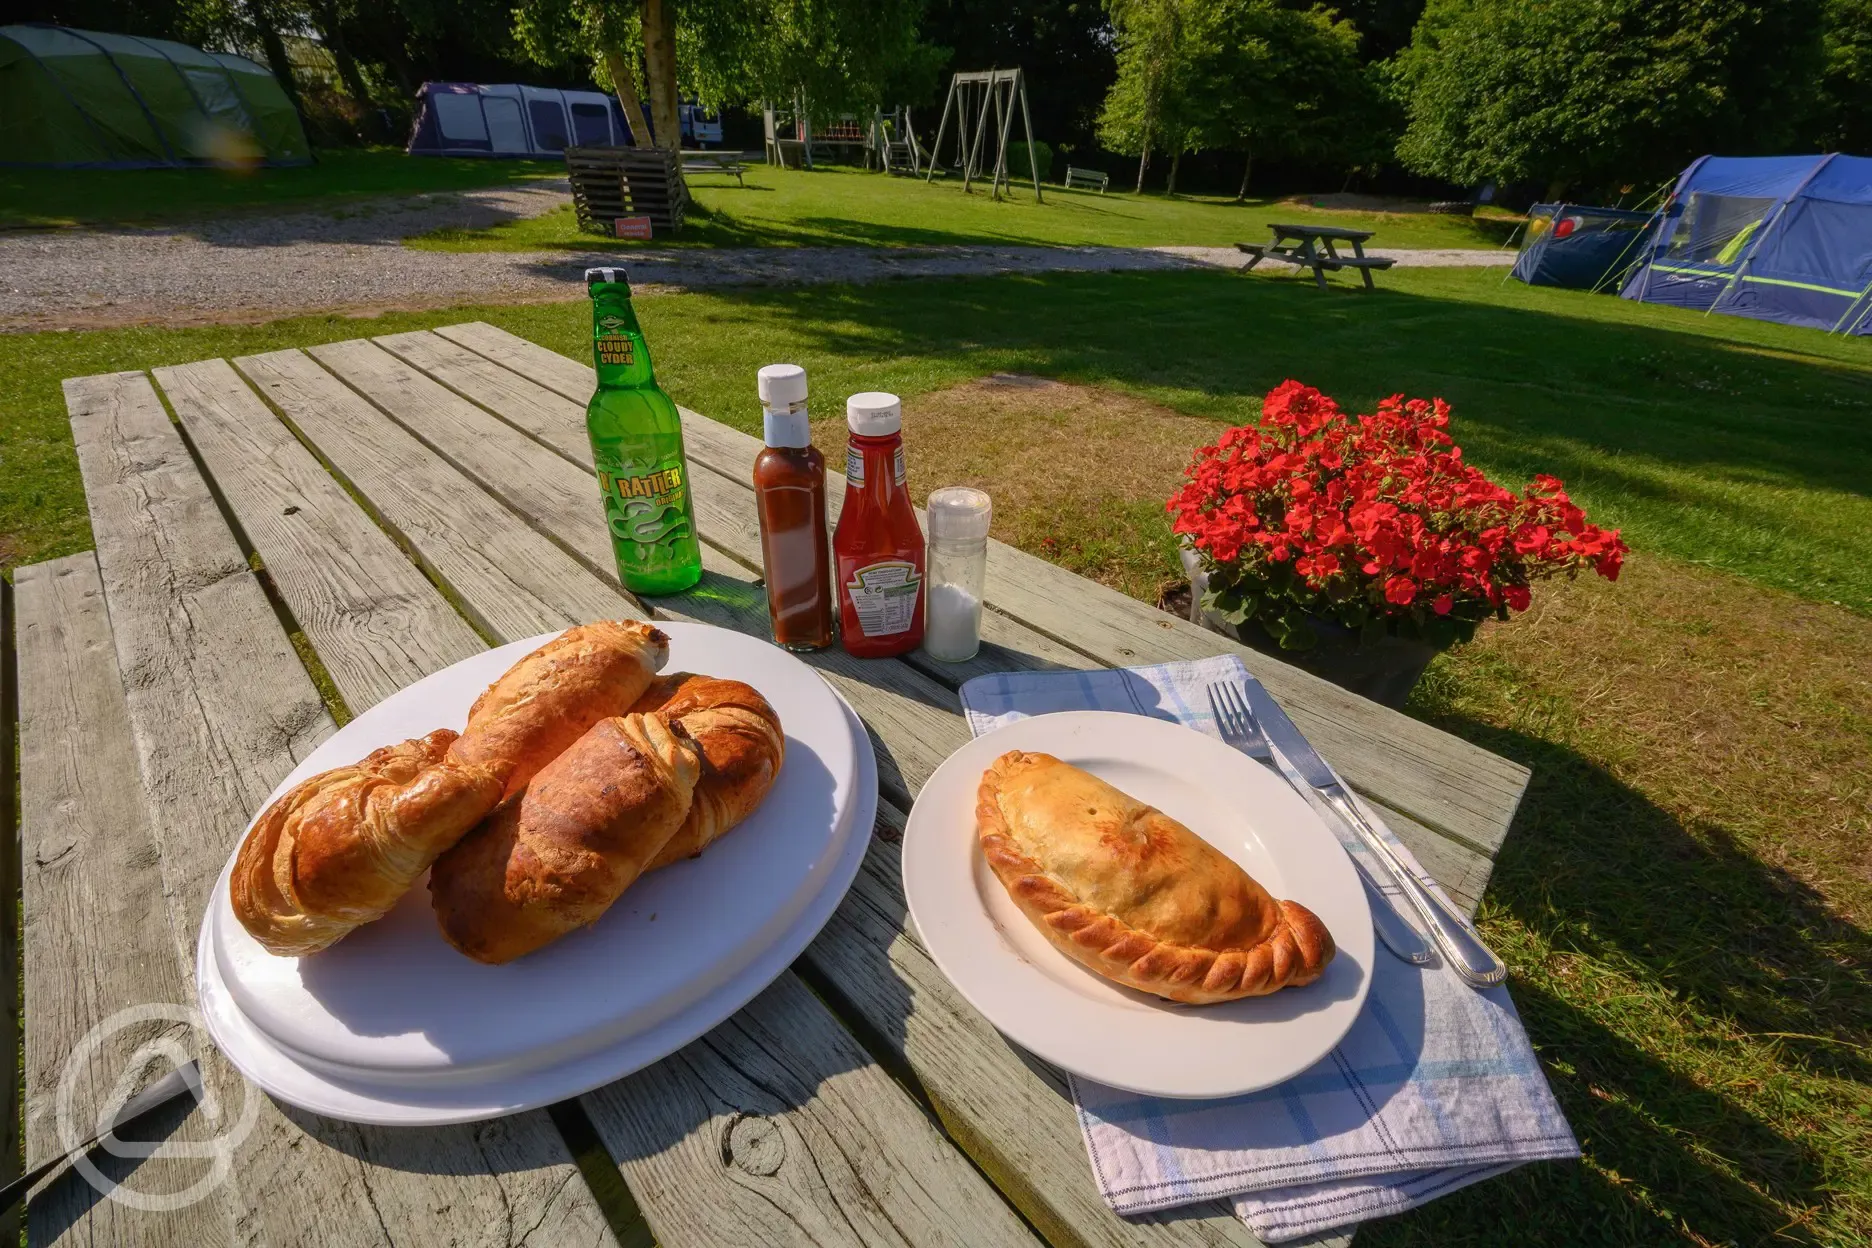 Local ciders and pastries sold at the onsite shop